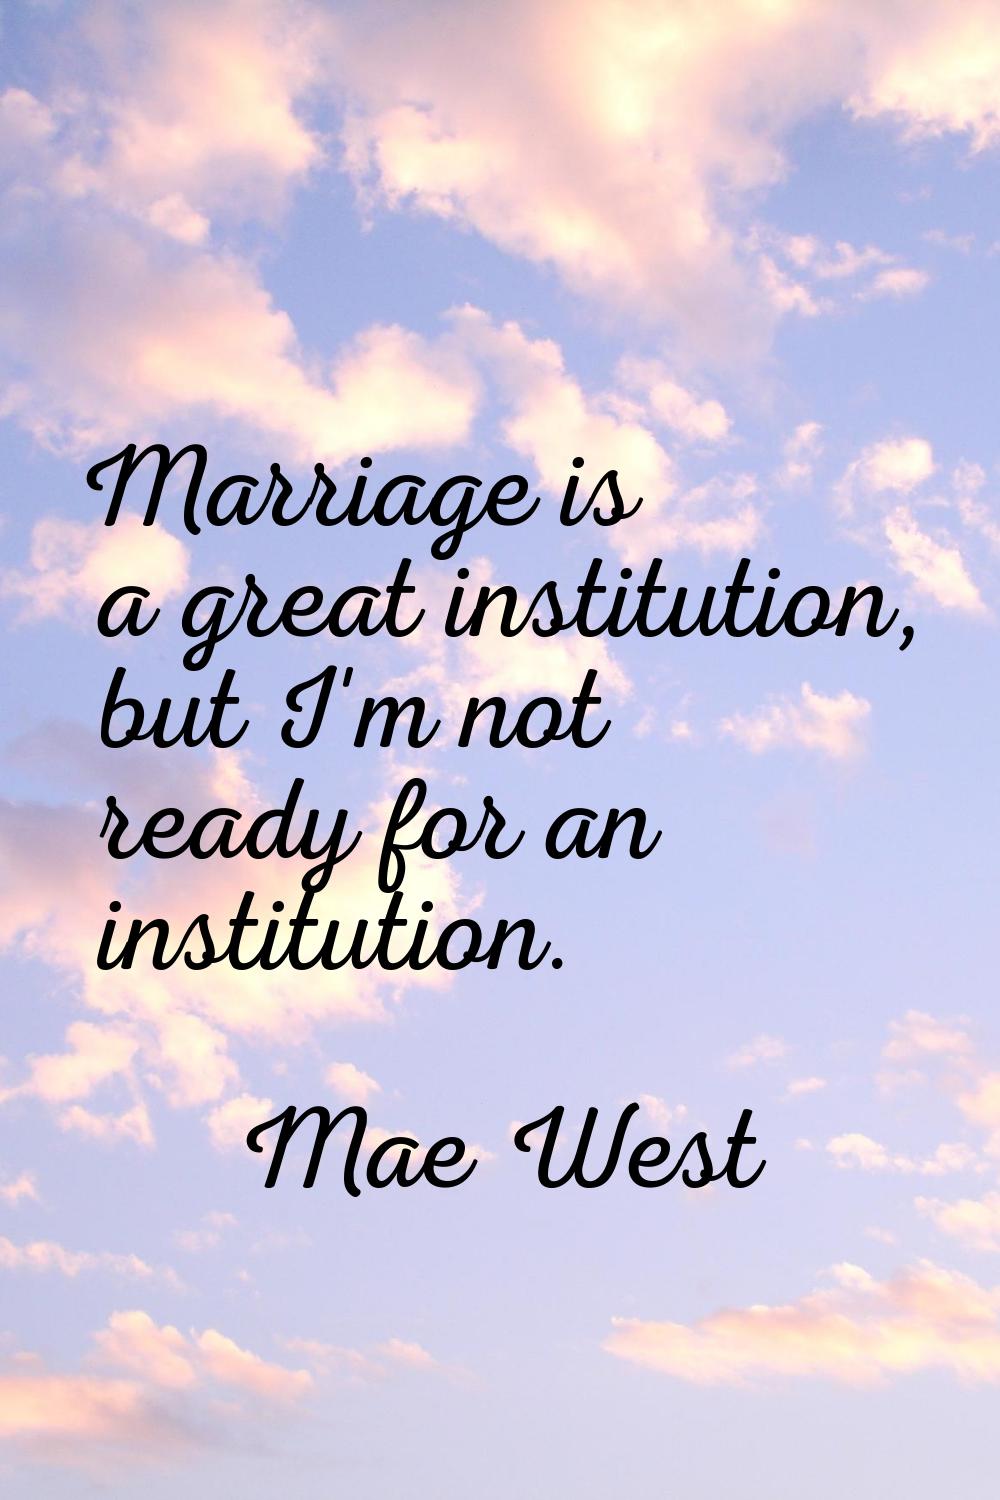 Marriage is a great institution, but I'm not ready for an institution.